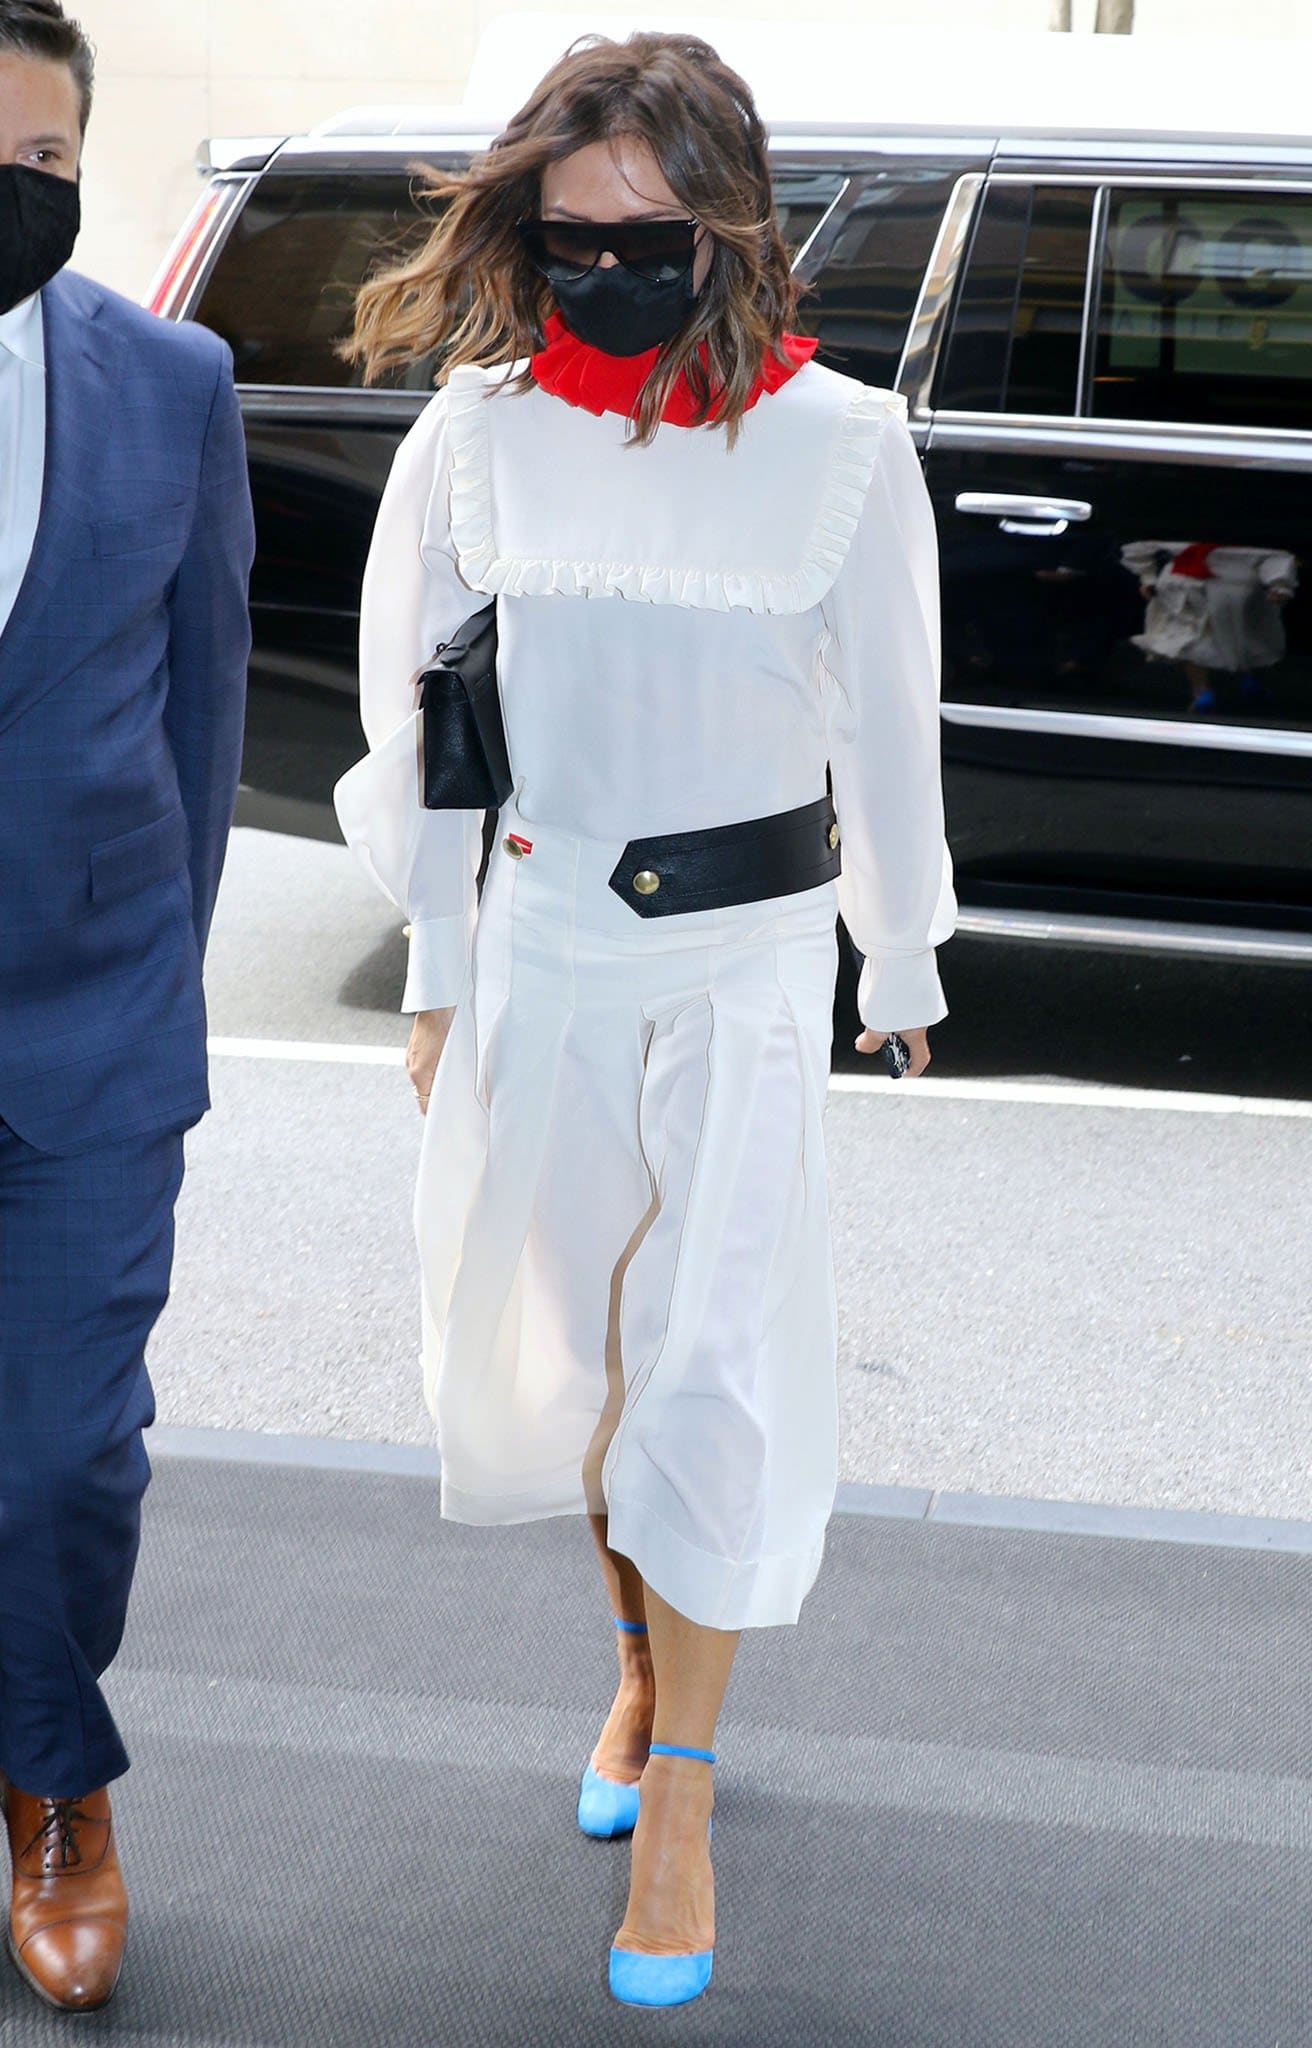 Victoria Beckham steps out of her hotel in a Fall 2021 dress with an asymmetrical belt and a red collar